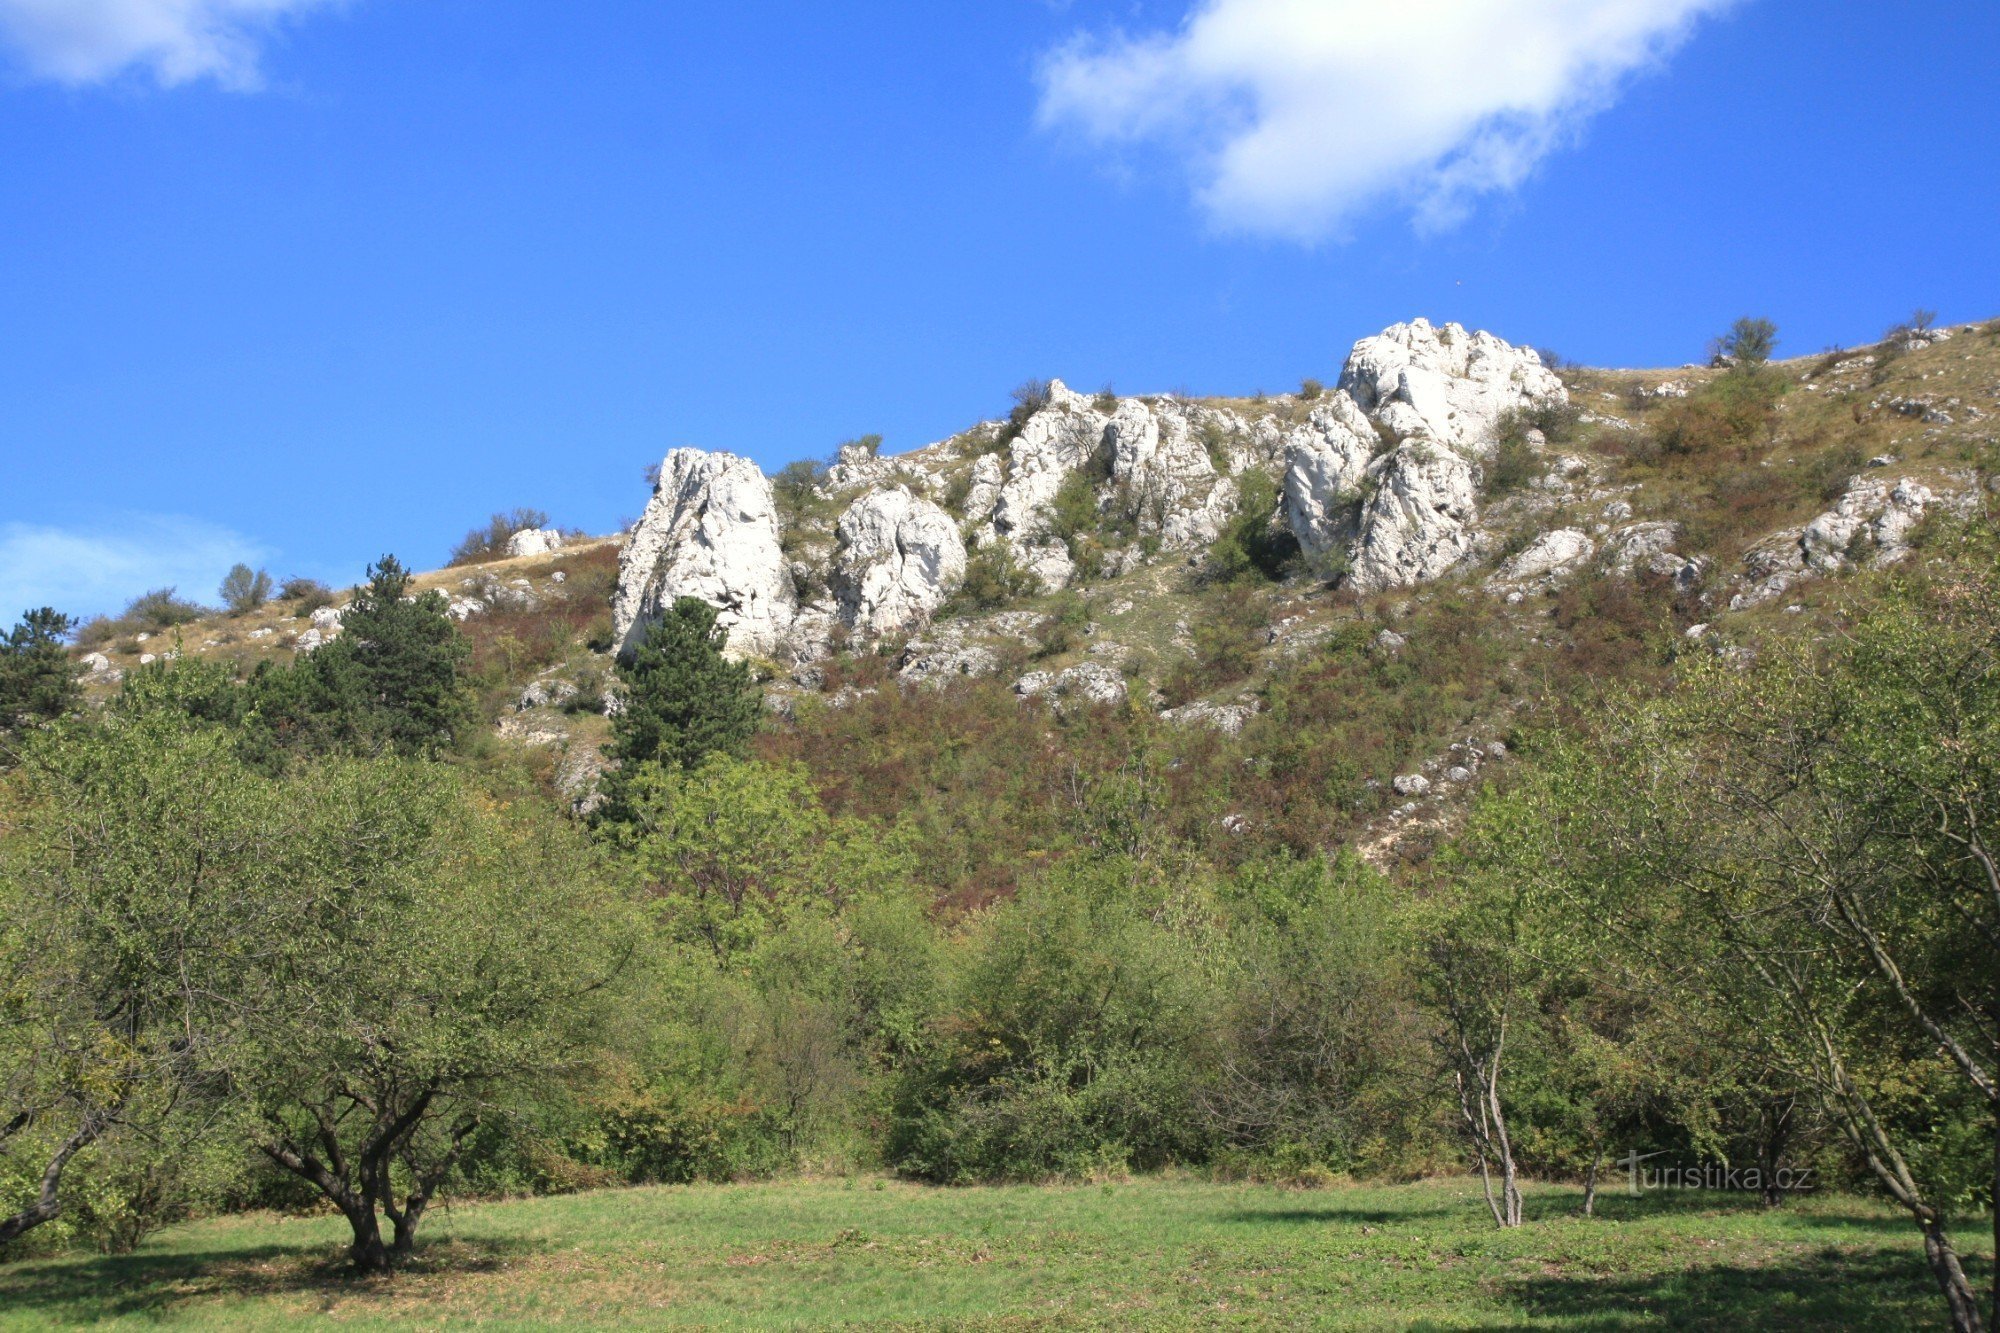 The Bavarian Rocks are also located on the western slope of the reserve